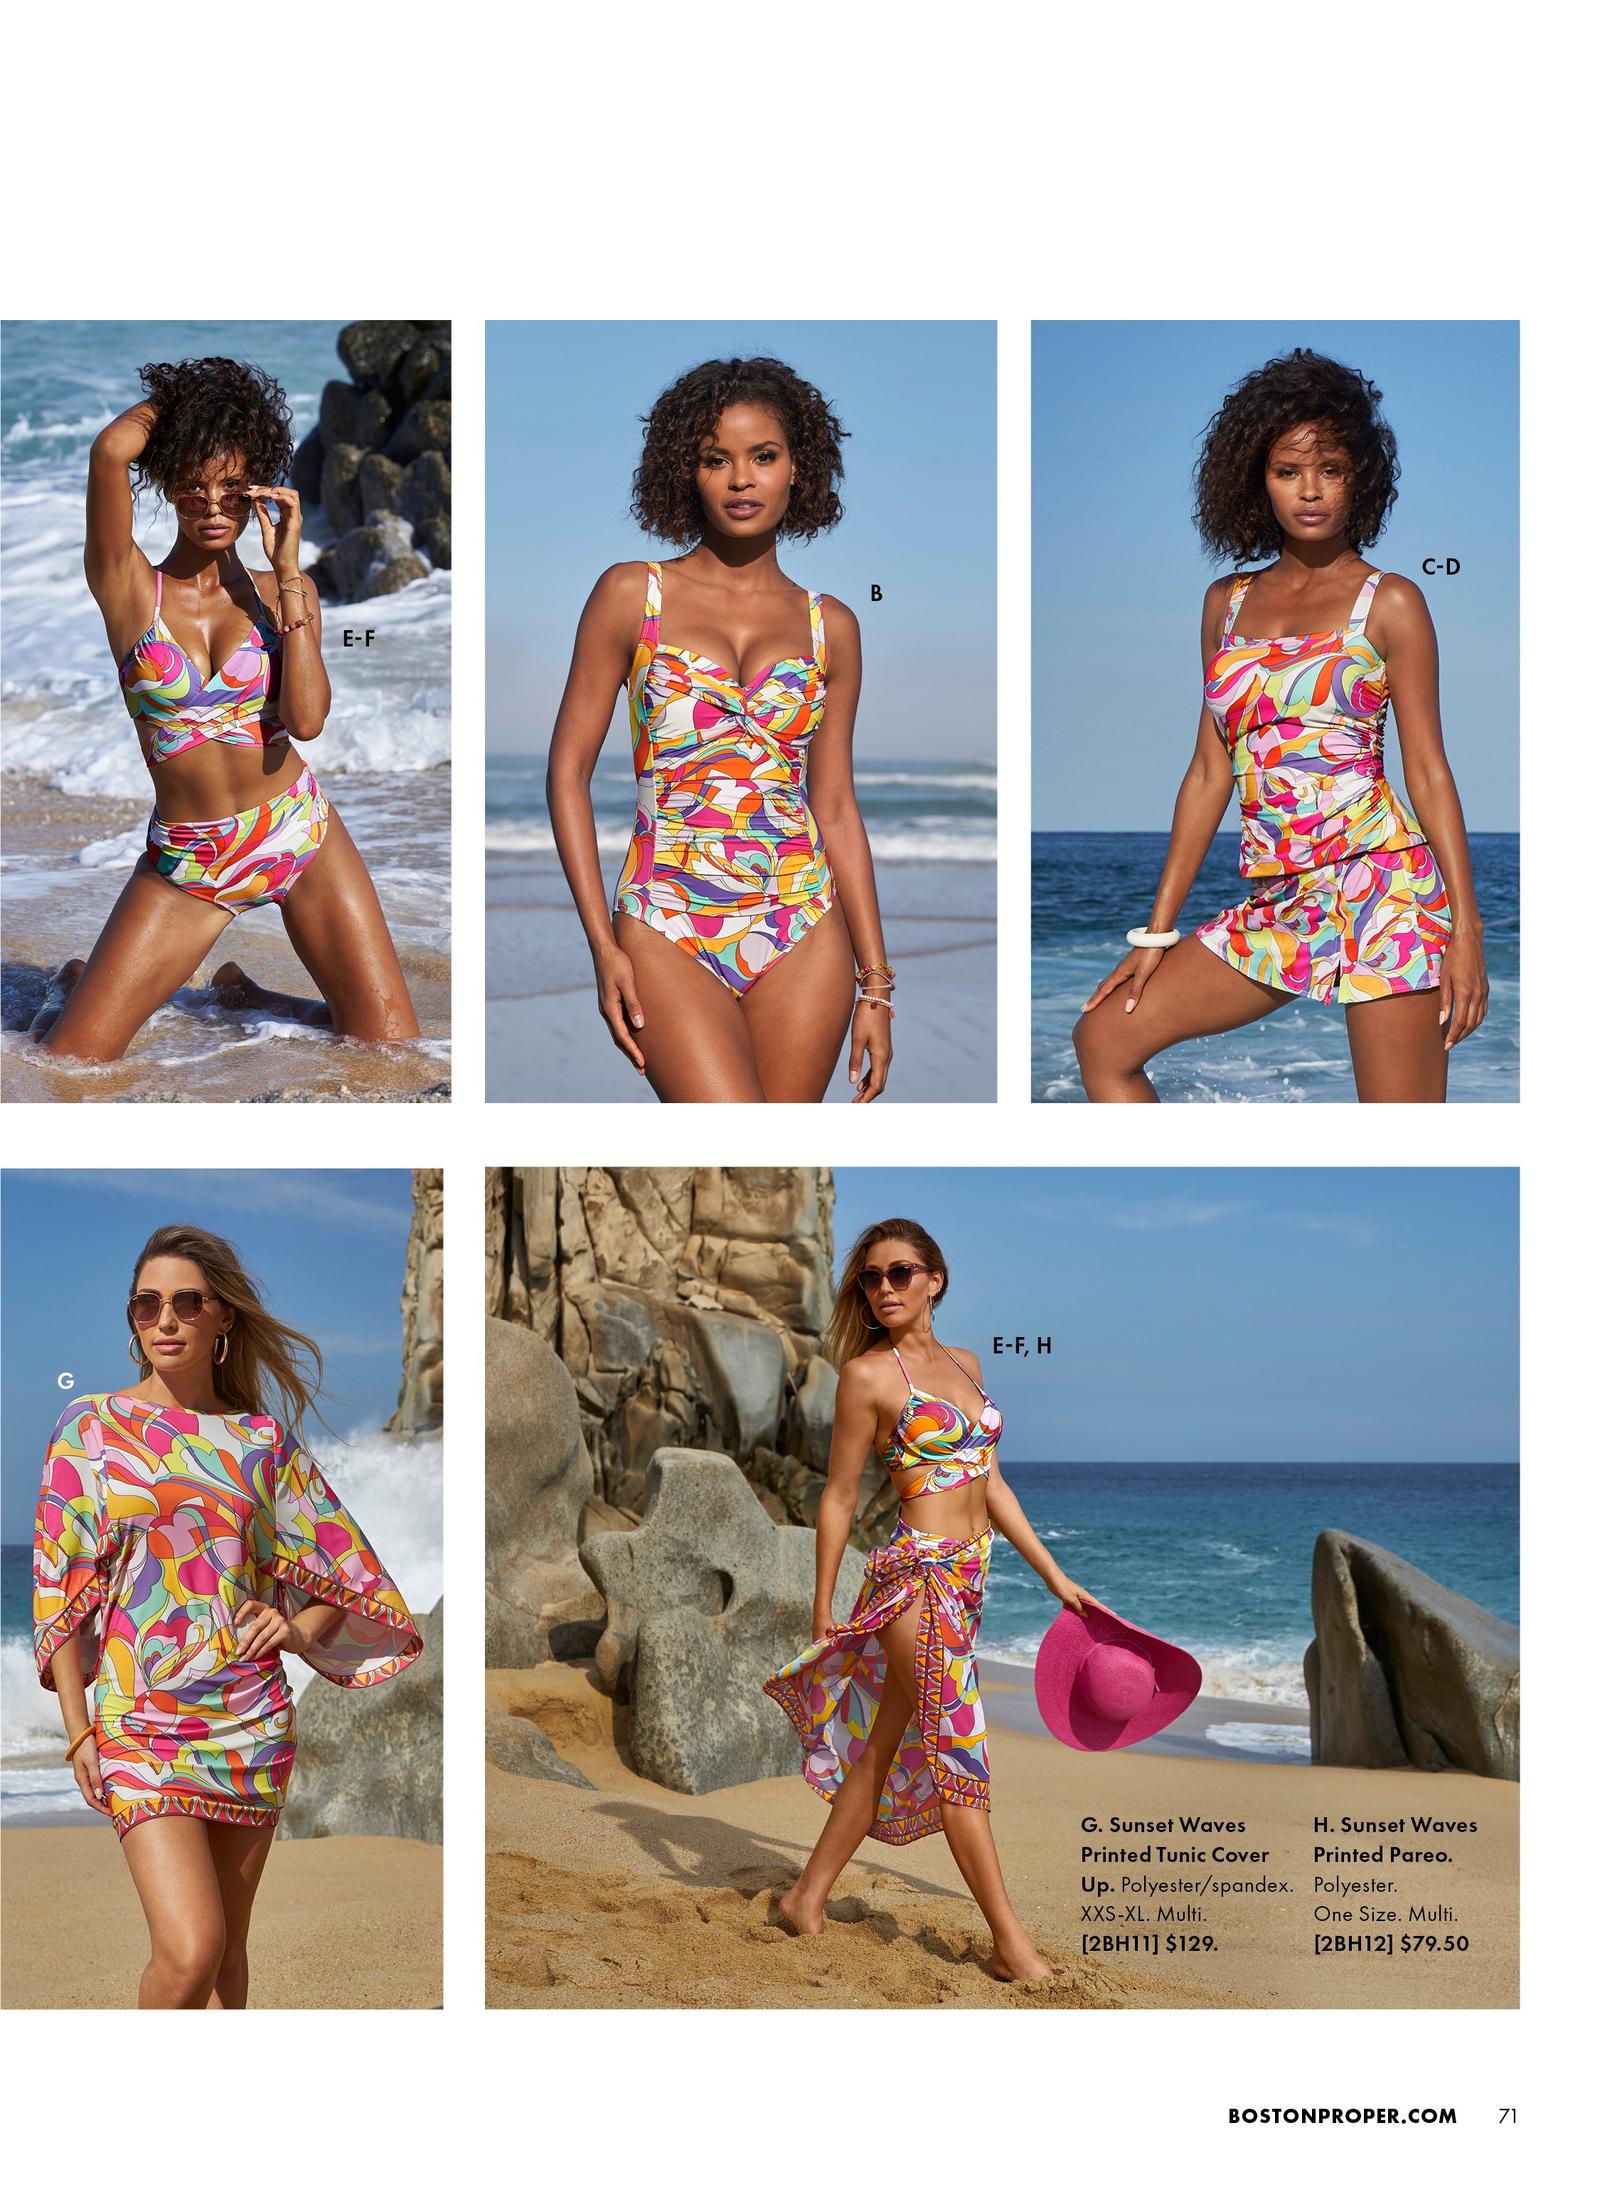 The first model is wearing the Underwire Wrap Bikini Top in a colorful abstract print and the High Waisted Bikini Bottom in a matching colorful abstract print. The model is displayed again wearing the Twist Front One-Piece Swimsuit in a colorful abstract print. The model is then shown in the Square Neck Tankini Top in a colorful abstract print and the High Waisted Skirted Bottom in a colorful abstract print. There is a second model wearing the Sunset Waves Printed Tunic Cover Up in a colorful abstract print. The second model is shown again wearing the Underwire Wrap Bikini Top in a colorful abstract print, the High Waisted Bikini Bottom in an abstract print and the Sunset Waves Printed Pareo in a colorful abstract print.